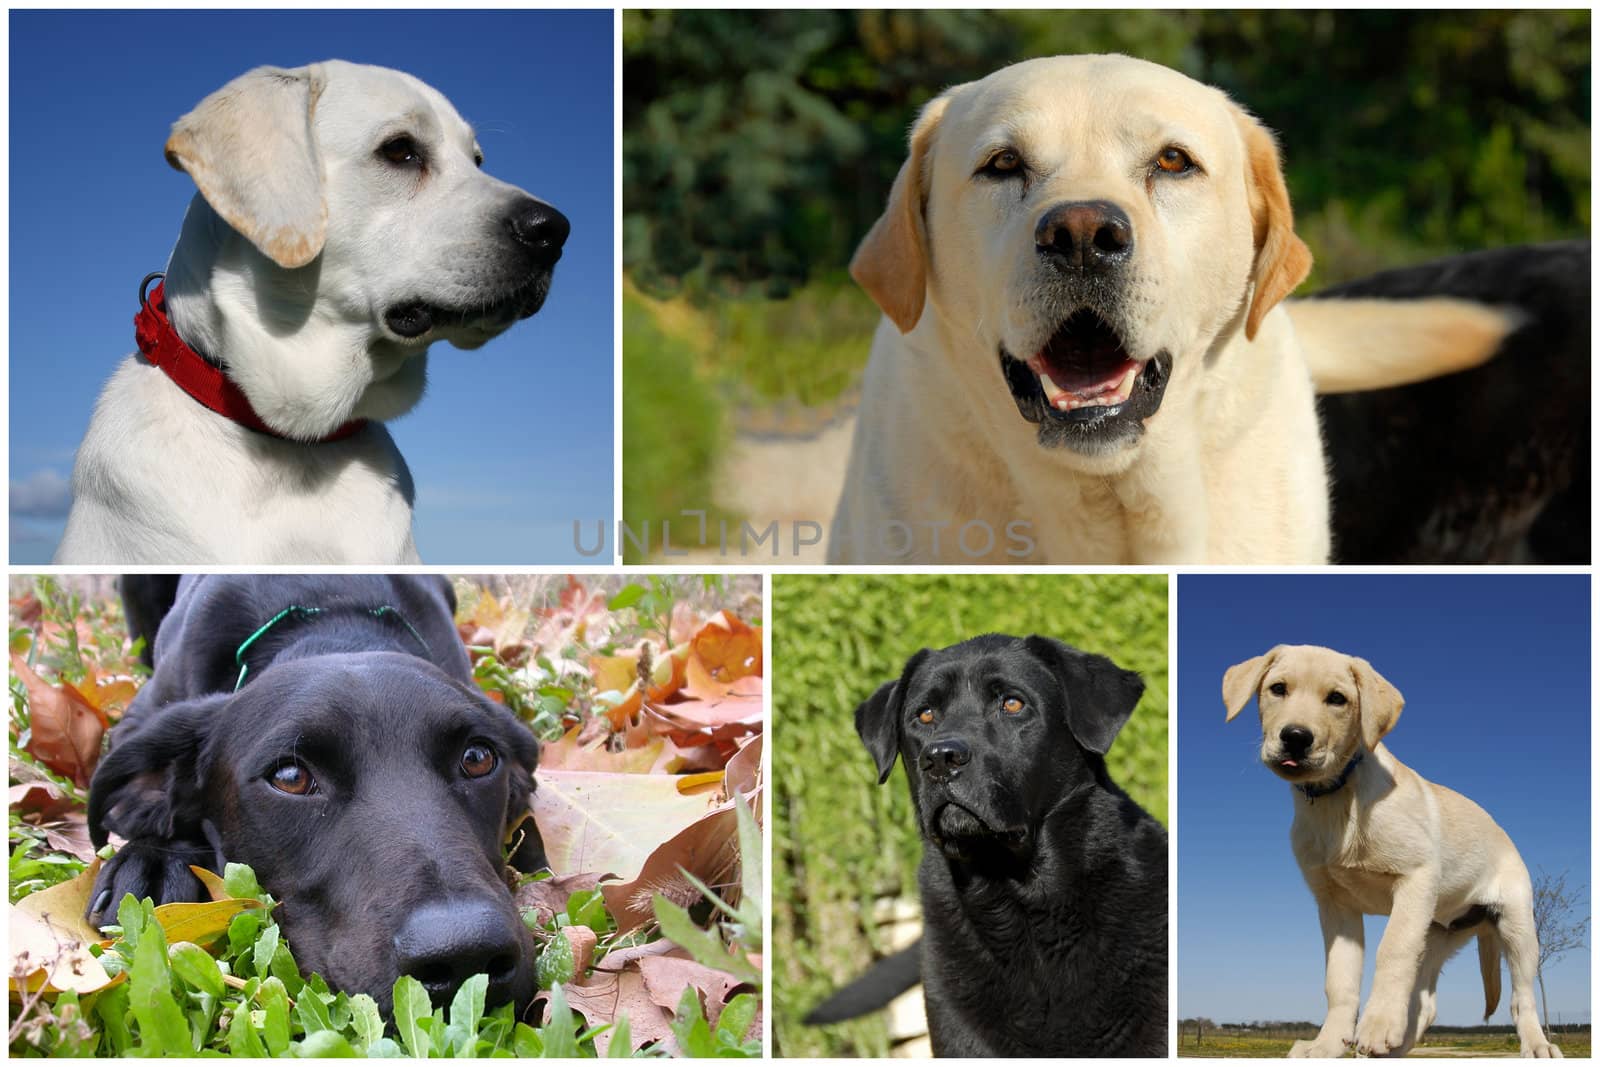 composite picture with purebred dogs and puppy labrador retriever